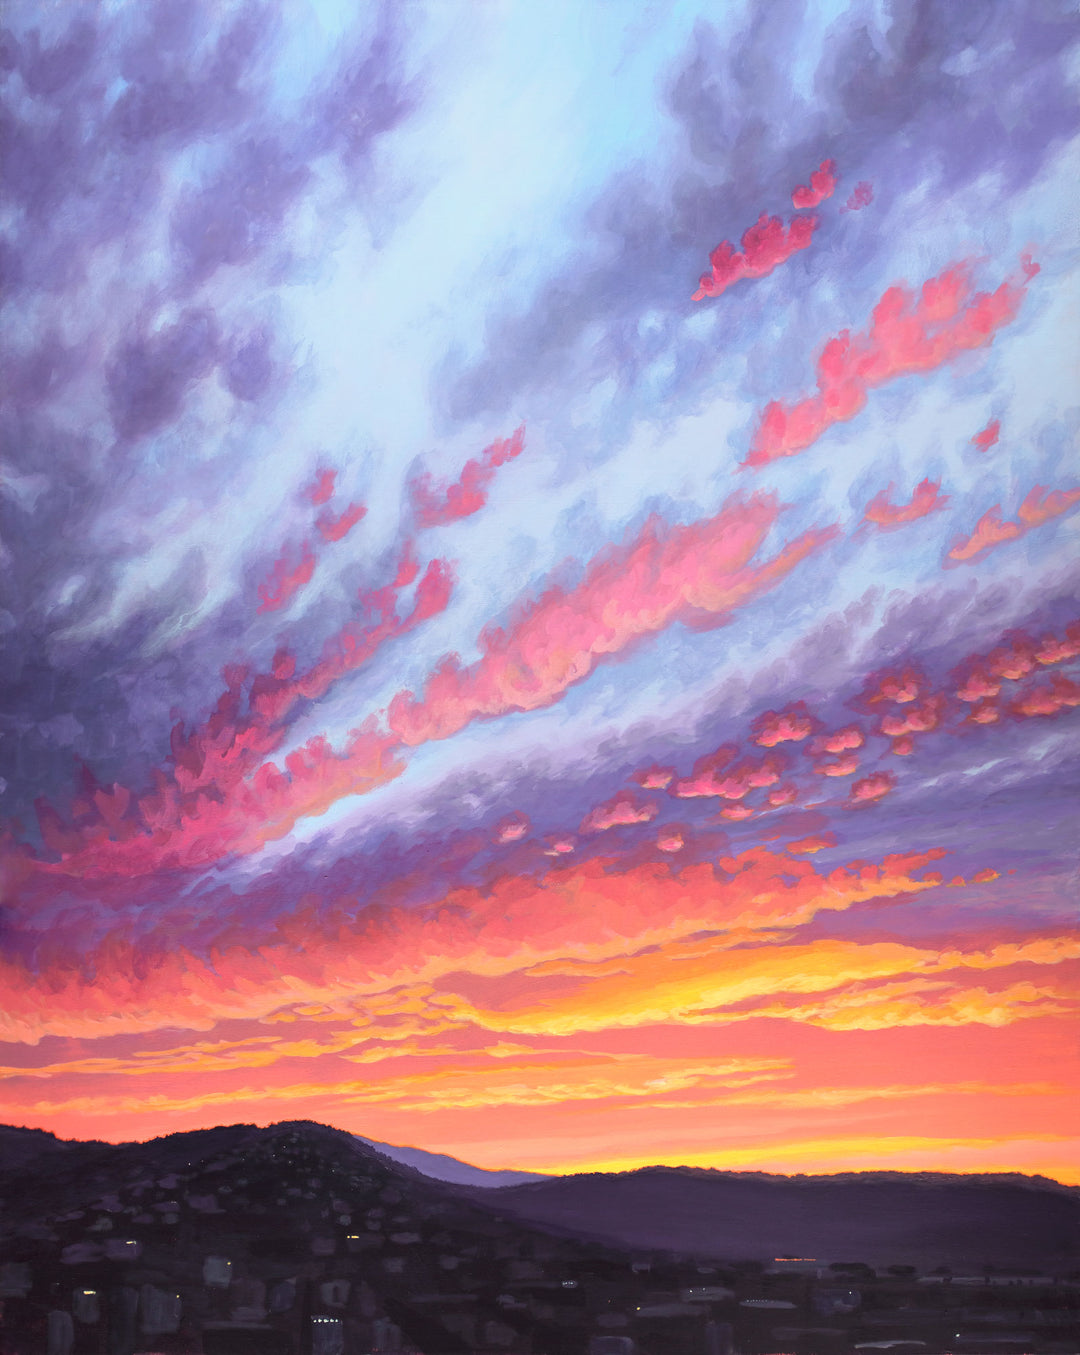 Art print of a vibrant sunset over mountains. 